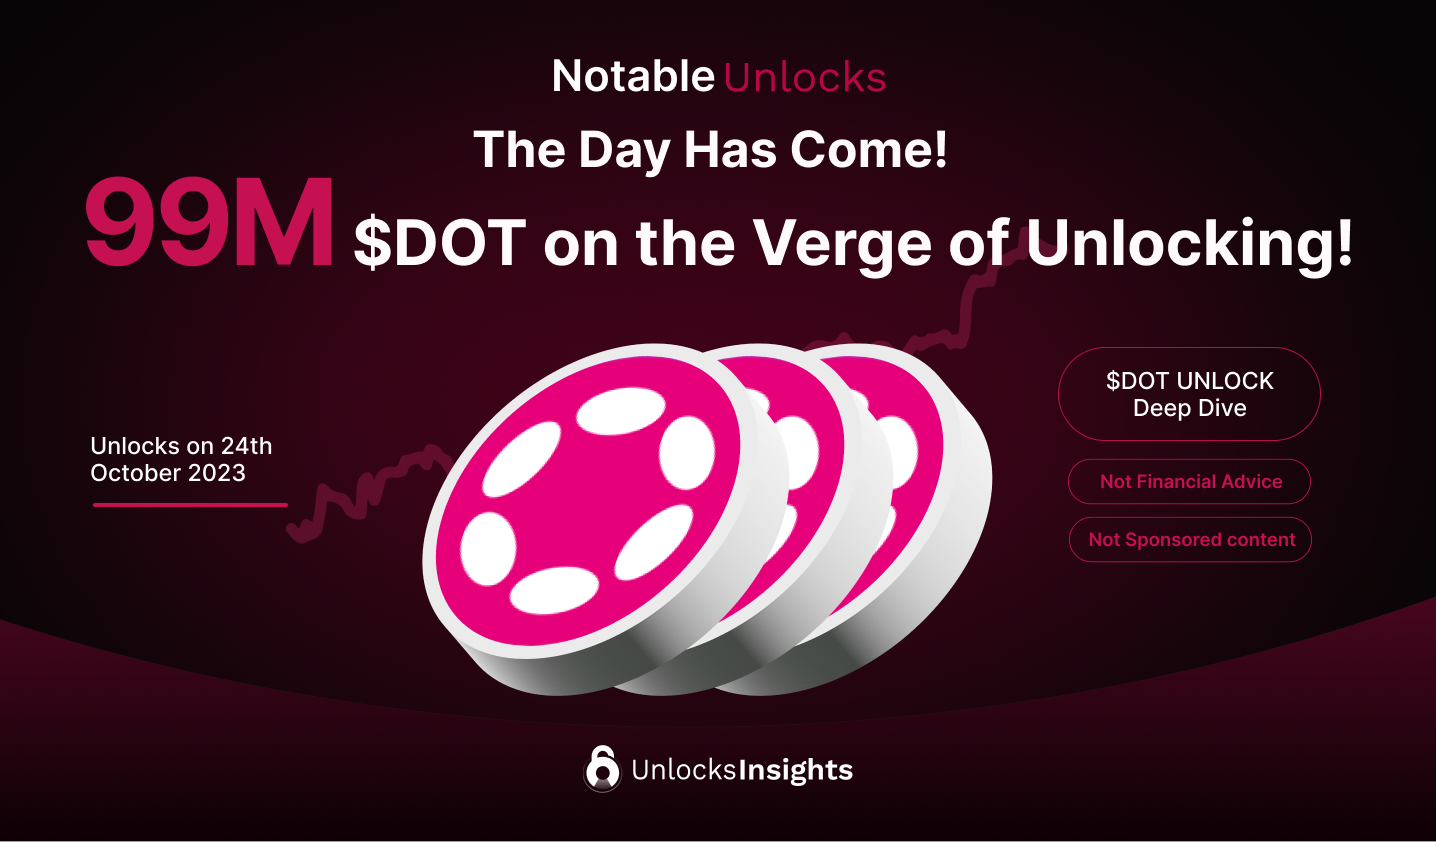 The Day Has Come: 99M $DOT on the Verge of Unlocking!